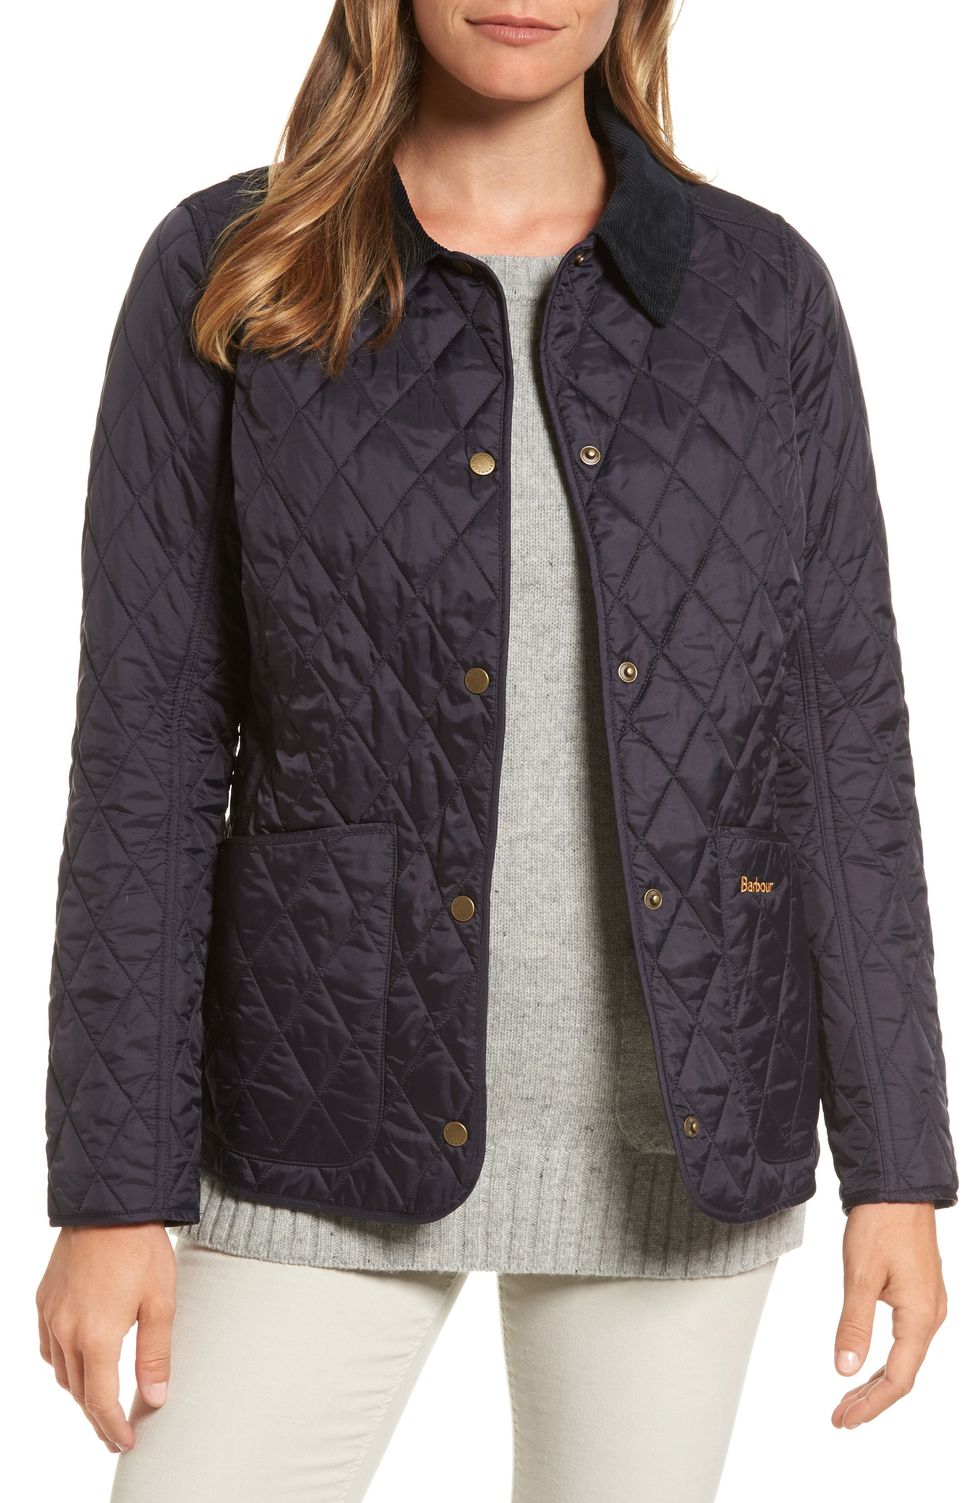 Barbour Jackets Are Up To 50 Percent Off At Nordstrom Right Now